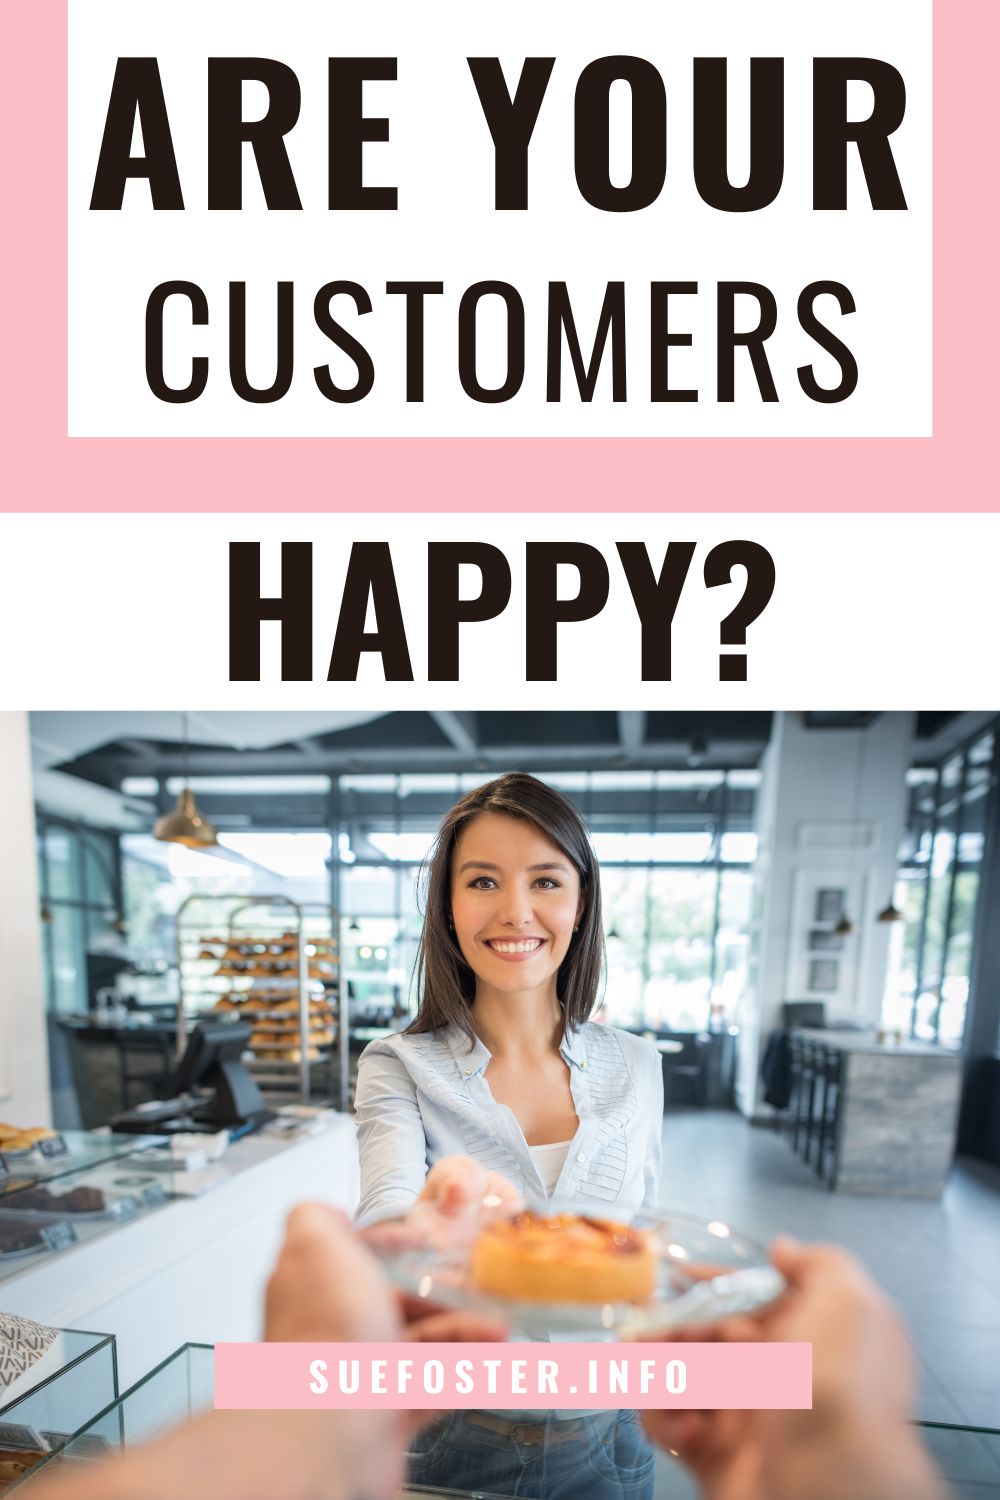 Customer satisfaction has to be at the very top of your priority list. Customers matter, as without them you don't have a business at all. 